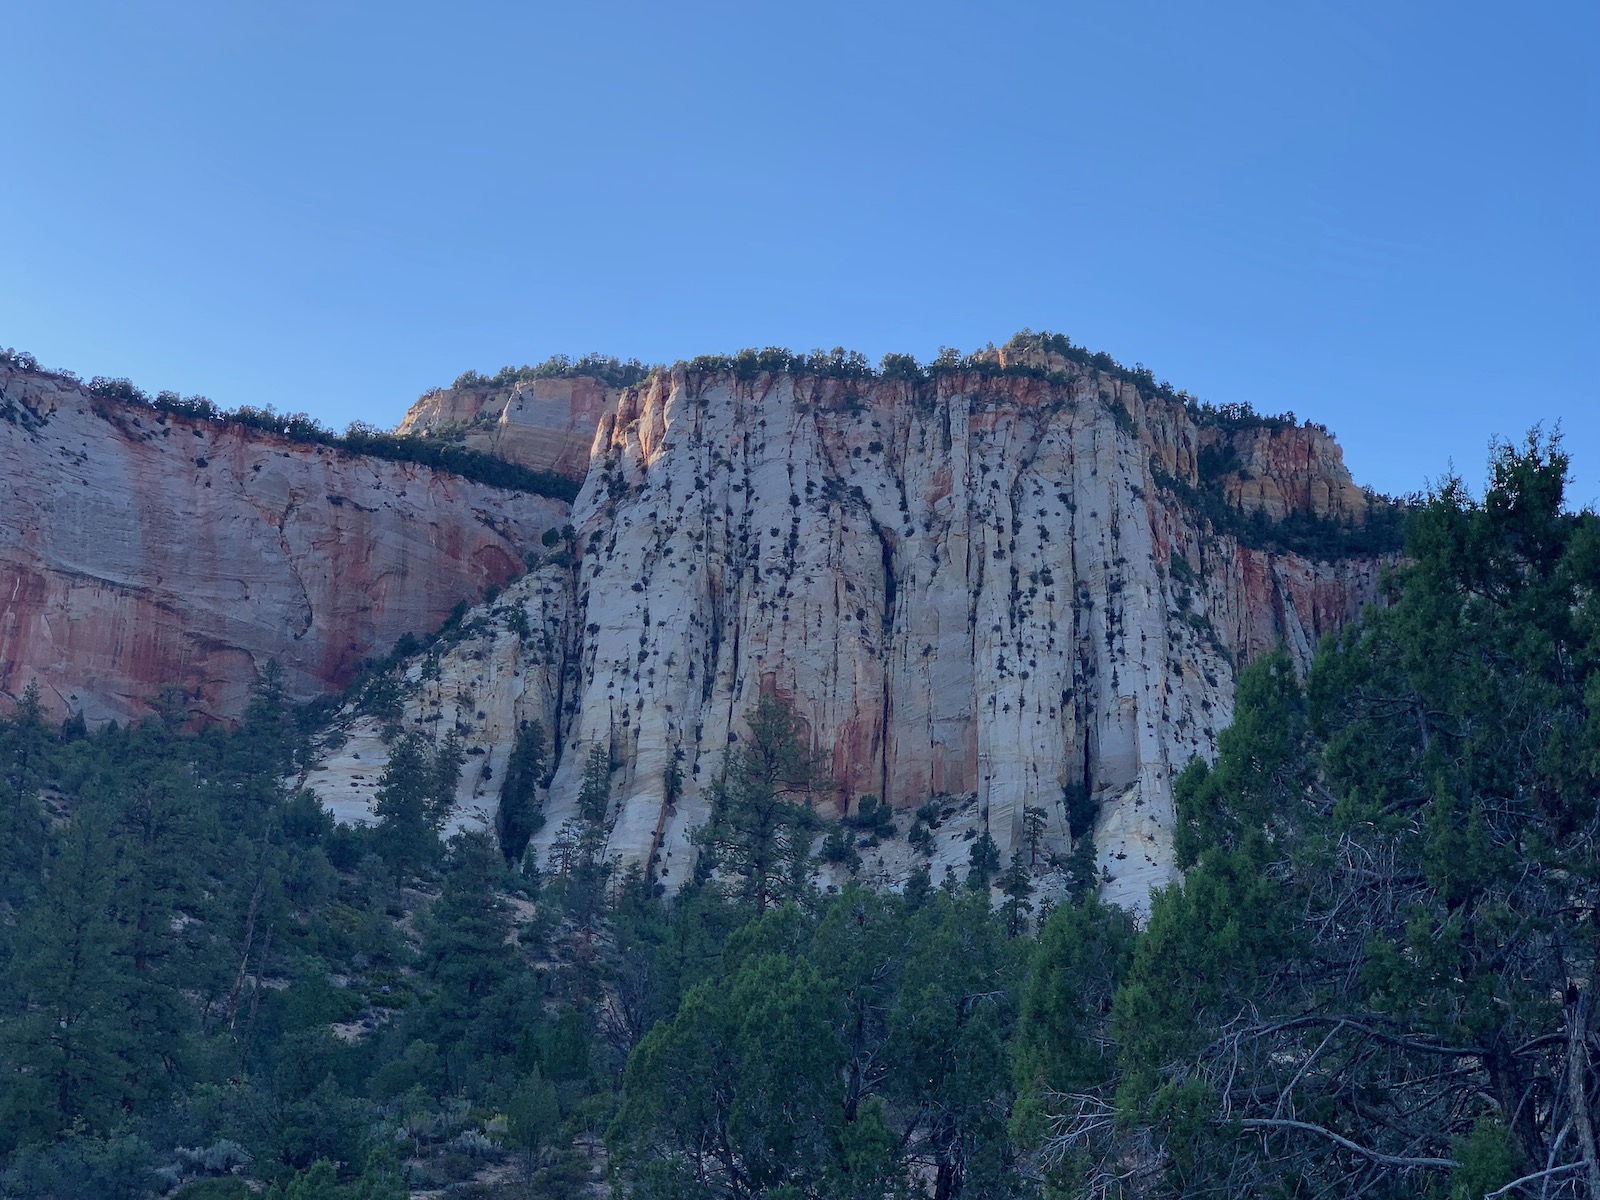 Our trip to Zion National Park